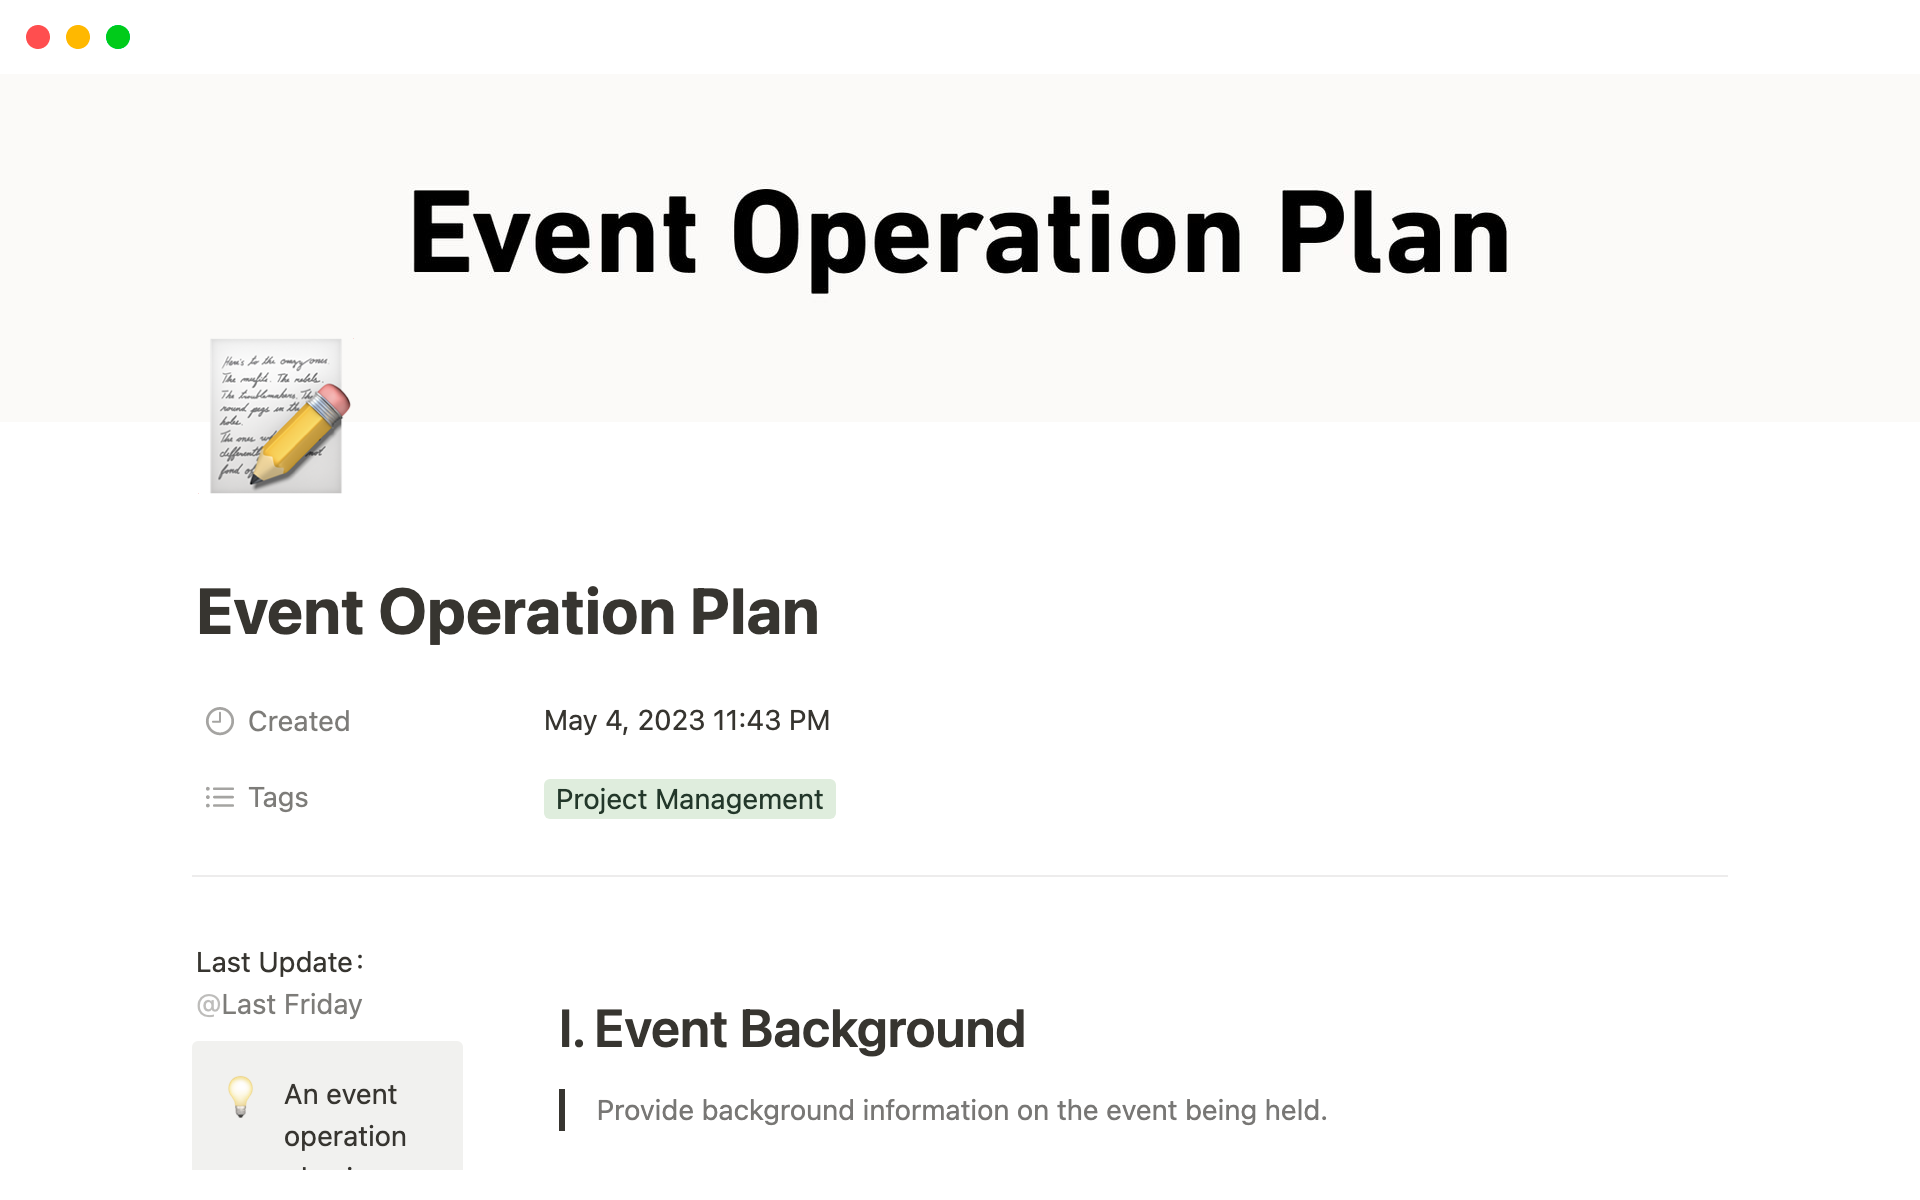 An event operation plan is a comprehensive plan developed to ensure the successful implementation and achievement of the desired results of an event.